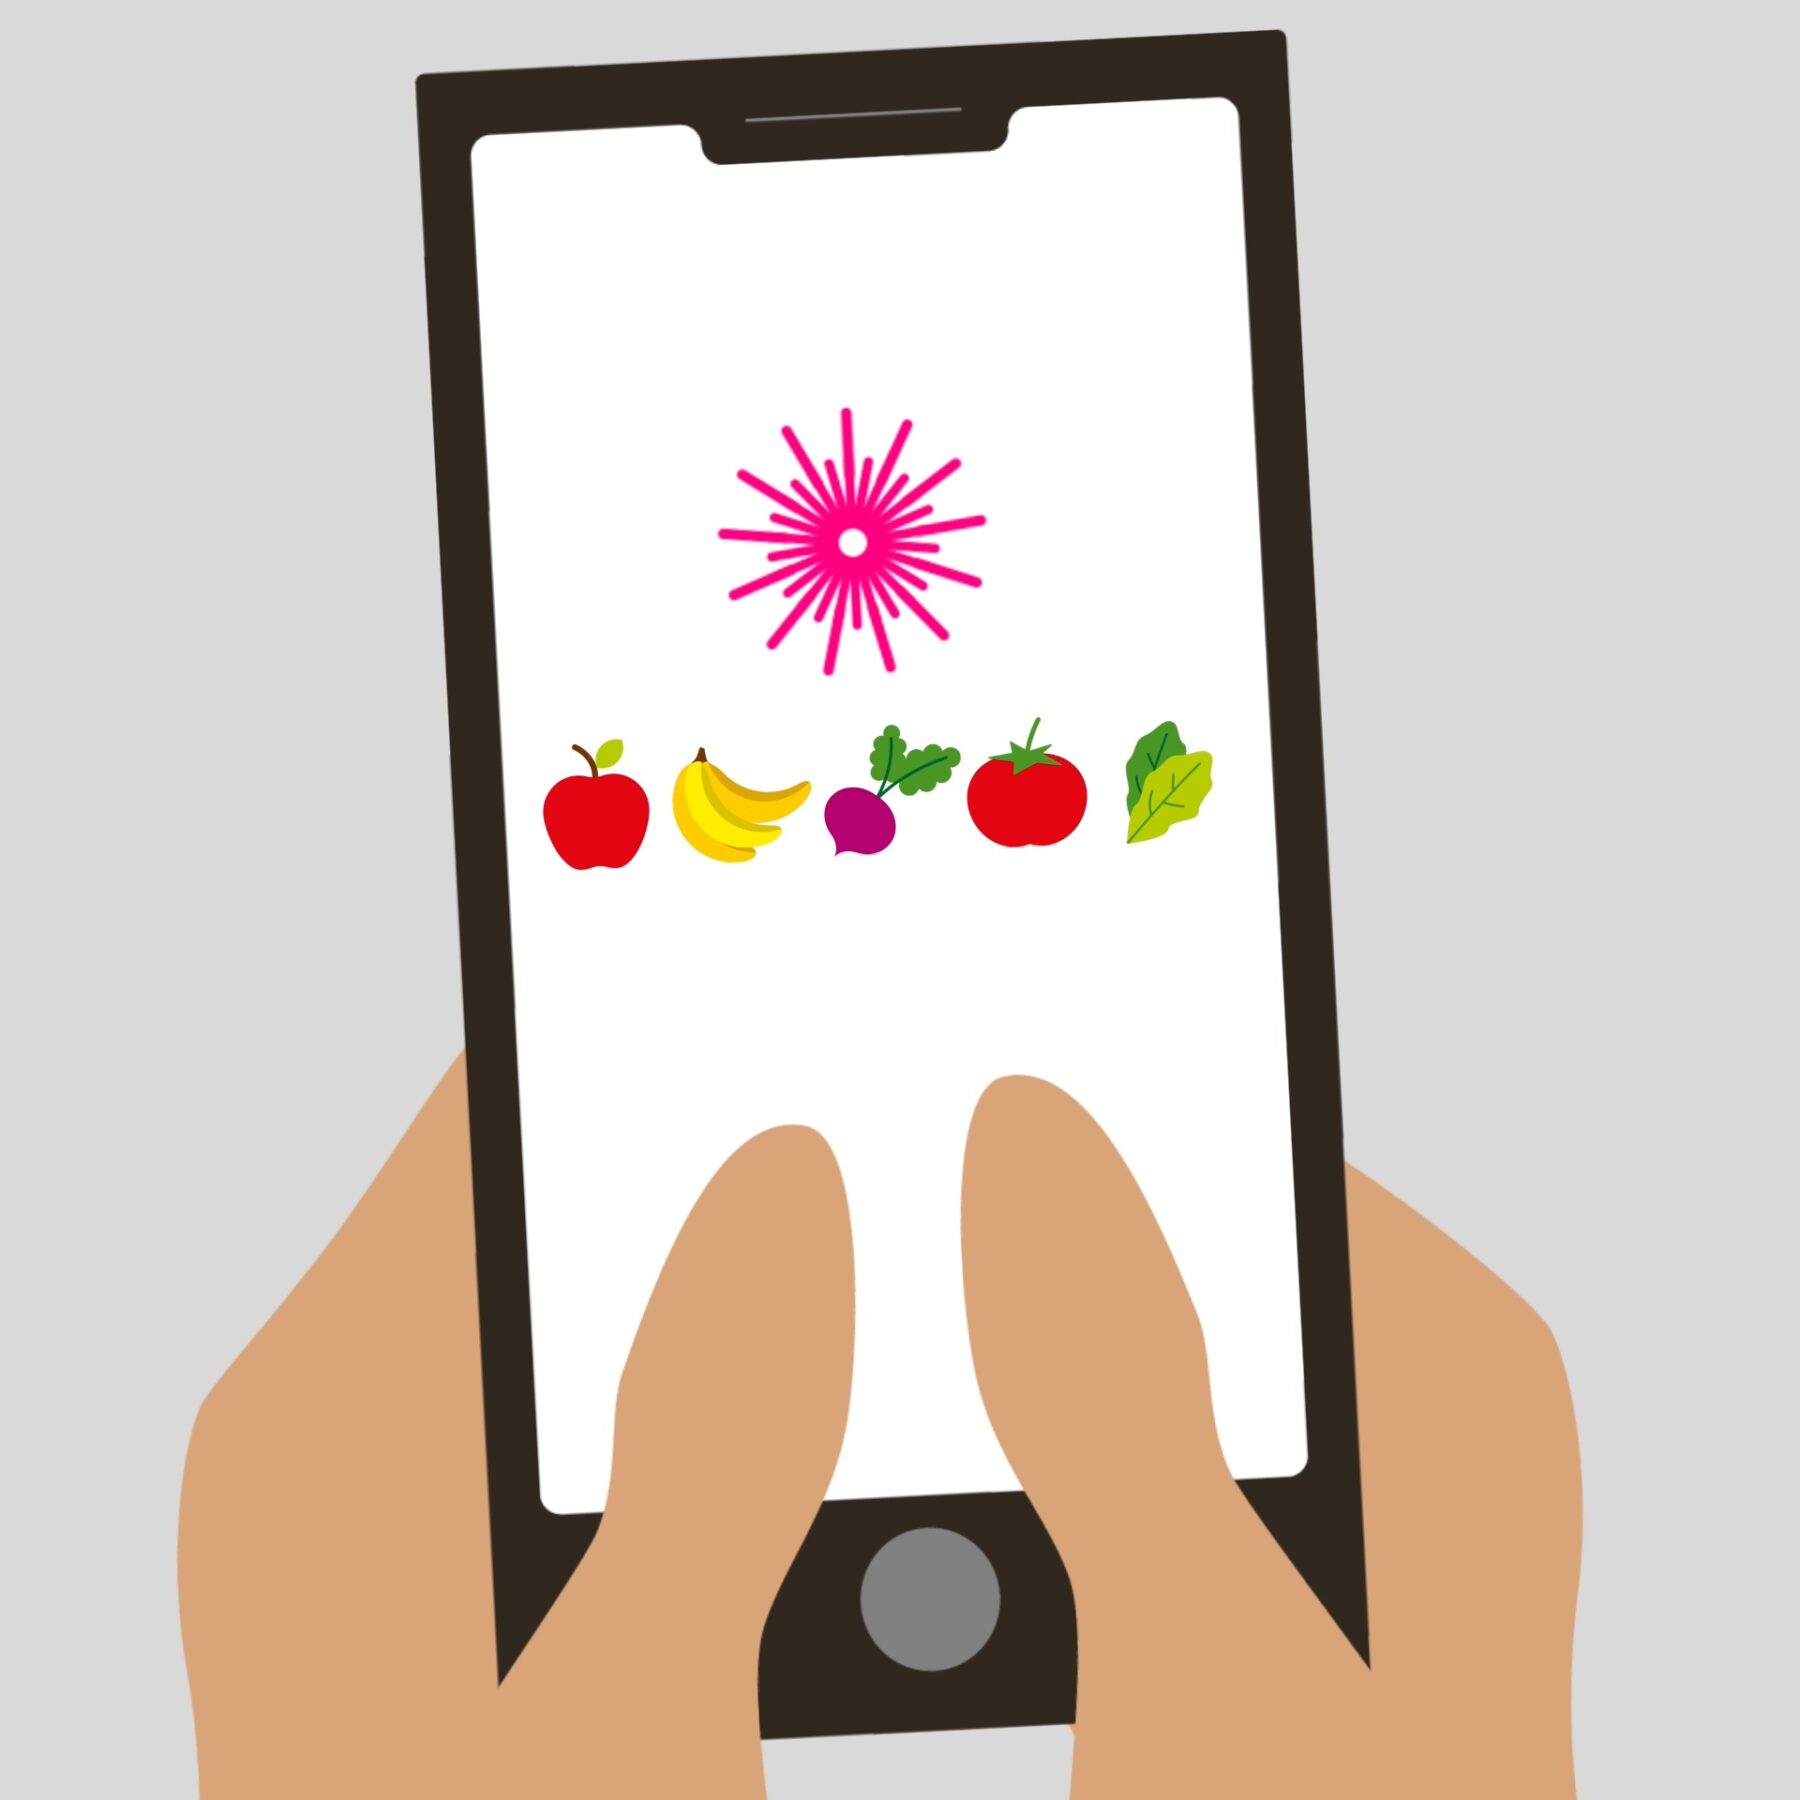 A picture of a phone game involving healthy foods.